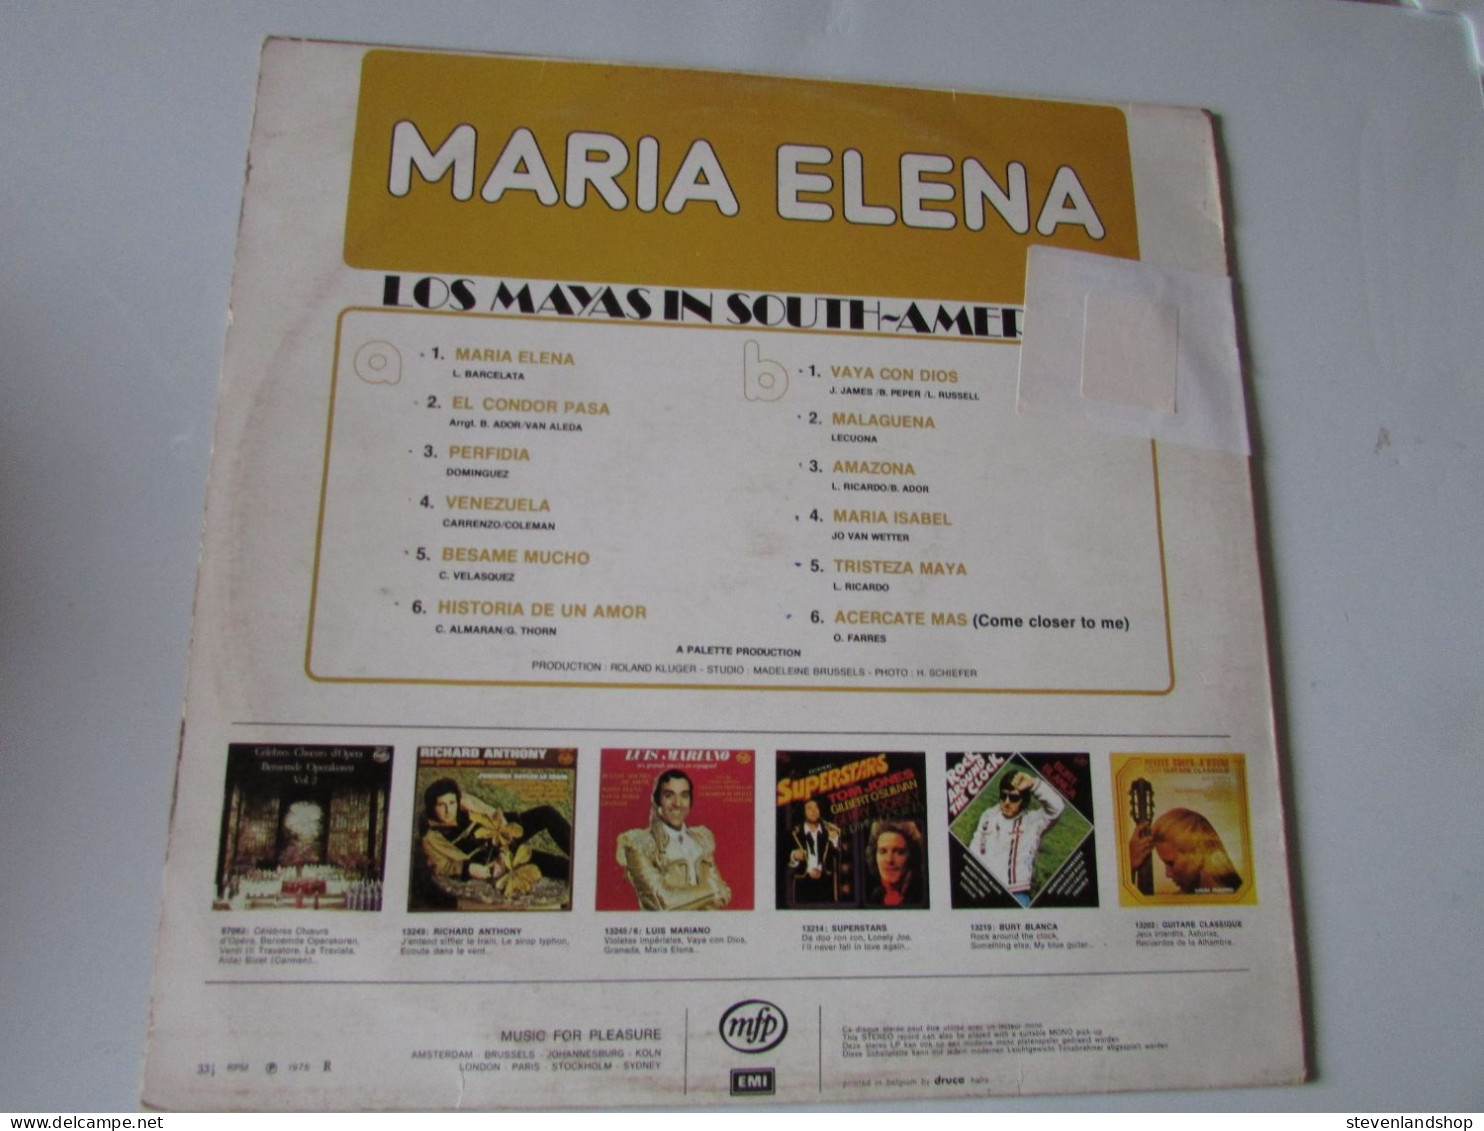 LOS MAYAS IN SOUTH - AMERICA, MARIA ELENA, LP - Other - Spanish Music